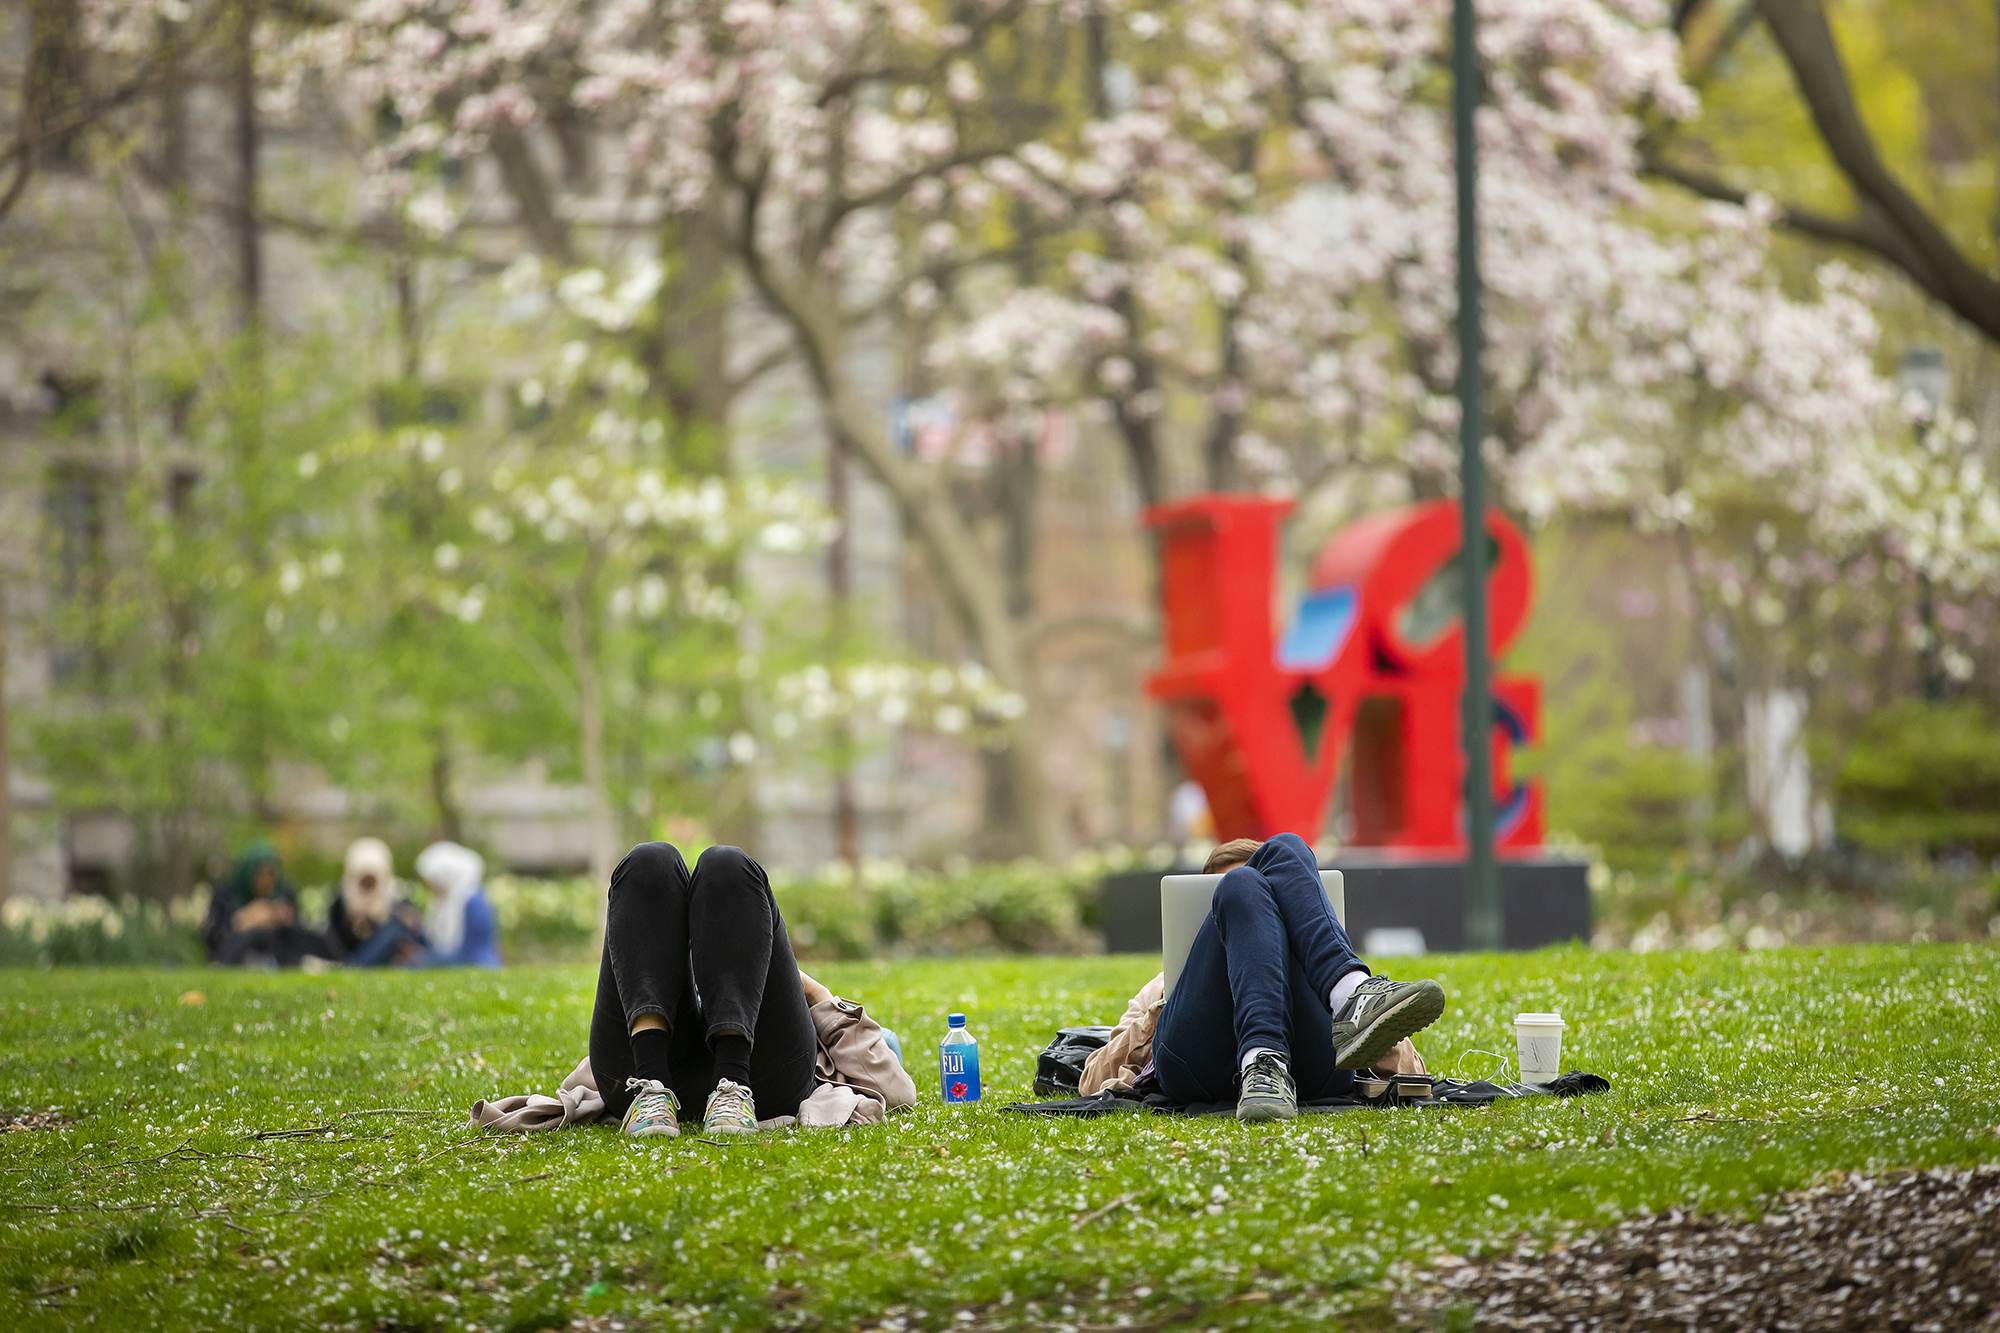 Students lounging on the grass in College Green